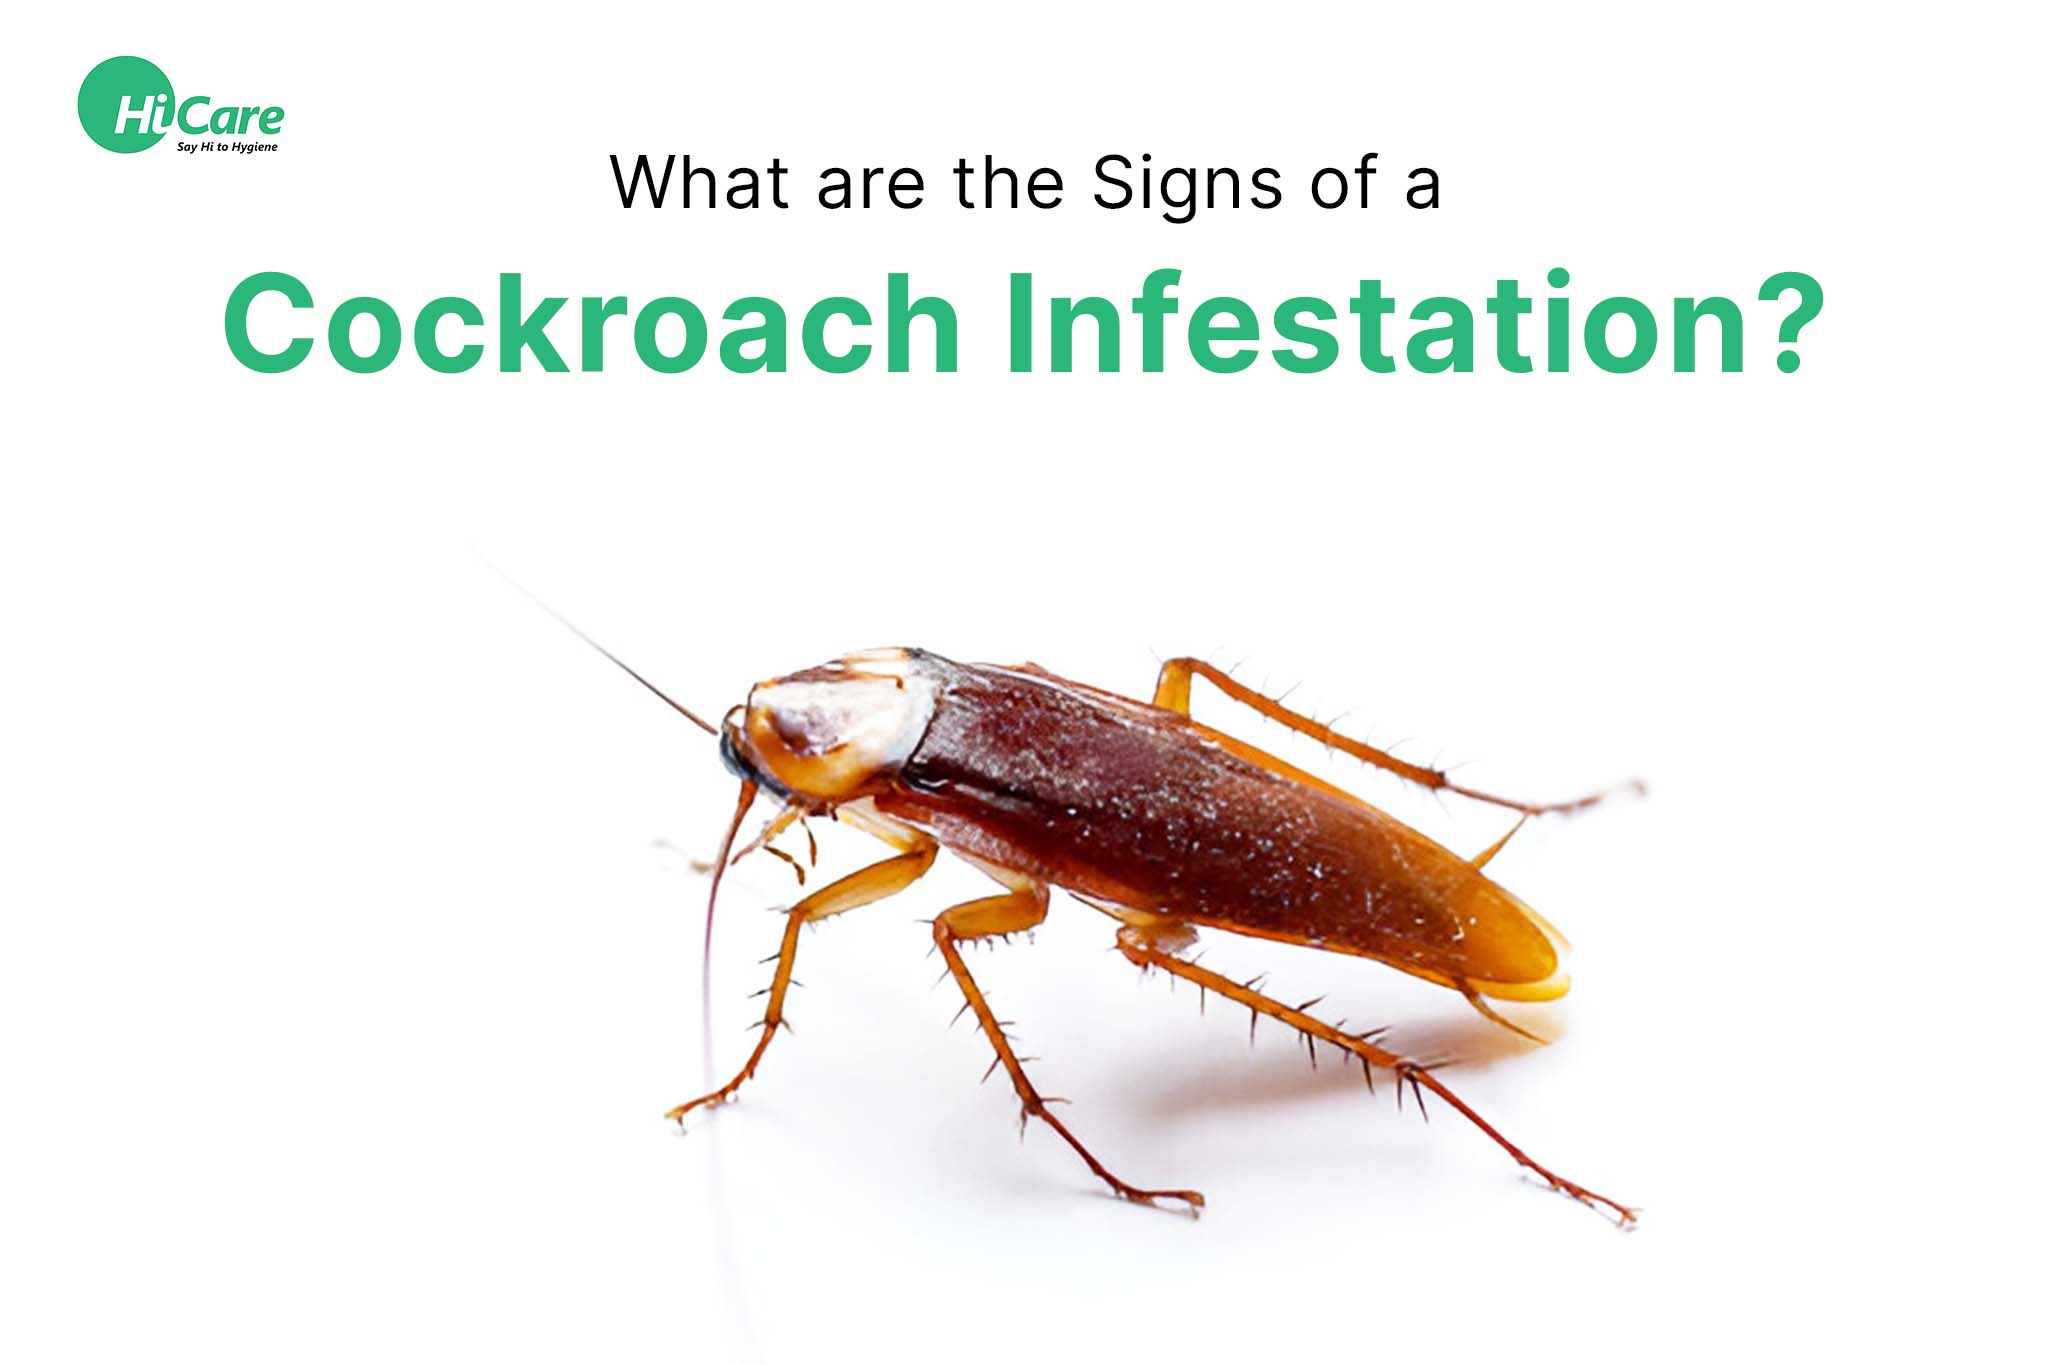 What are the Signs of a Cockroach Infestation?